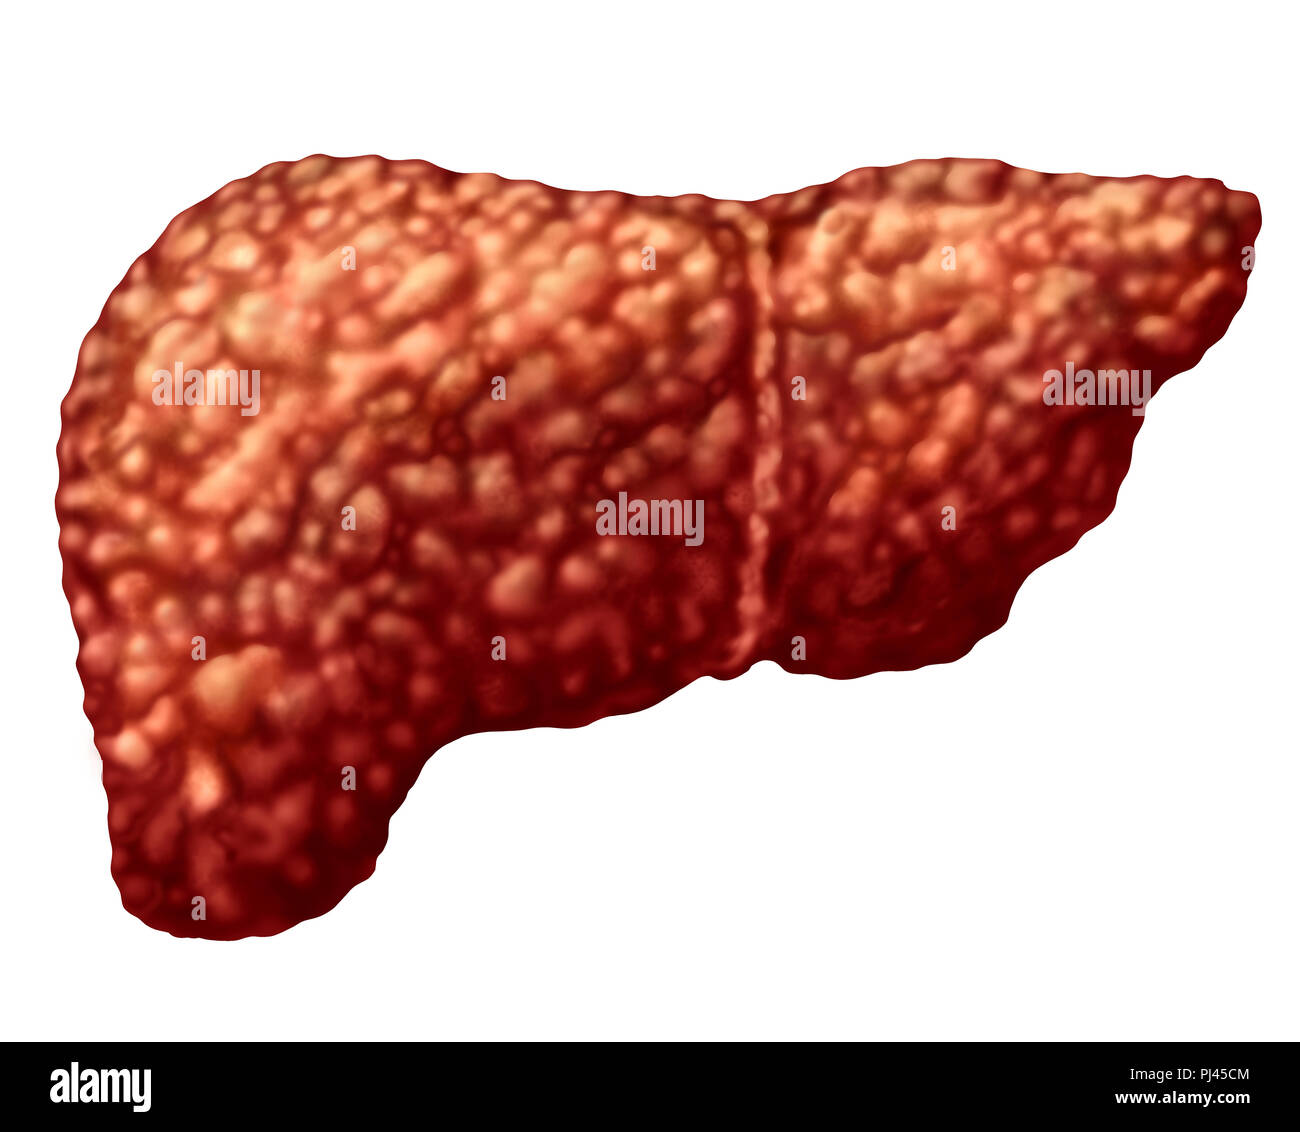 Fatty liver and hepatic steatosis body part isolated on white as a medical health care concept of the digestive system anatomy and vital organ. Stock Photo